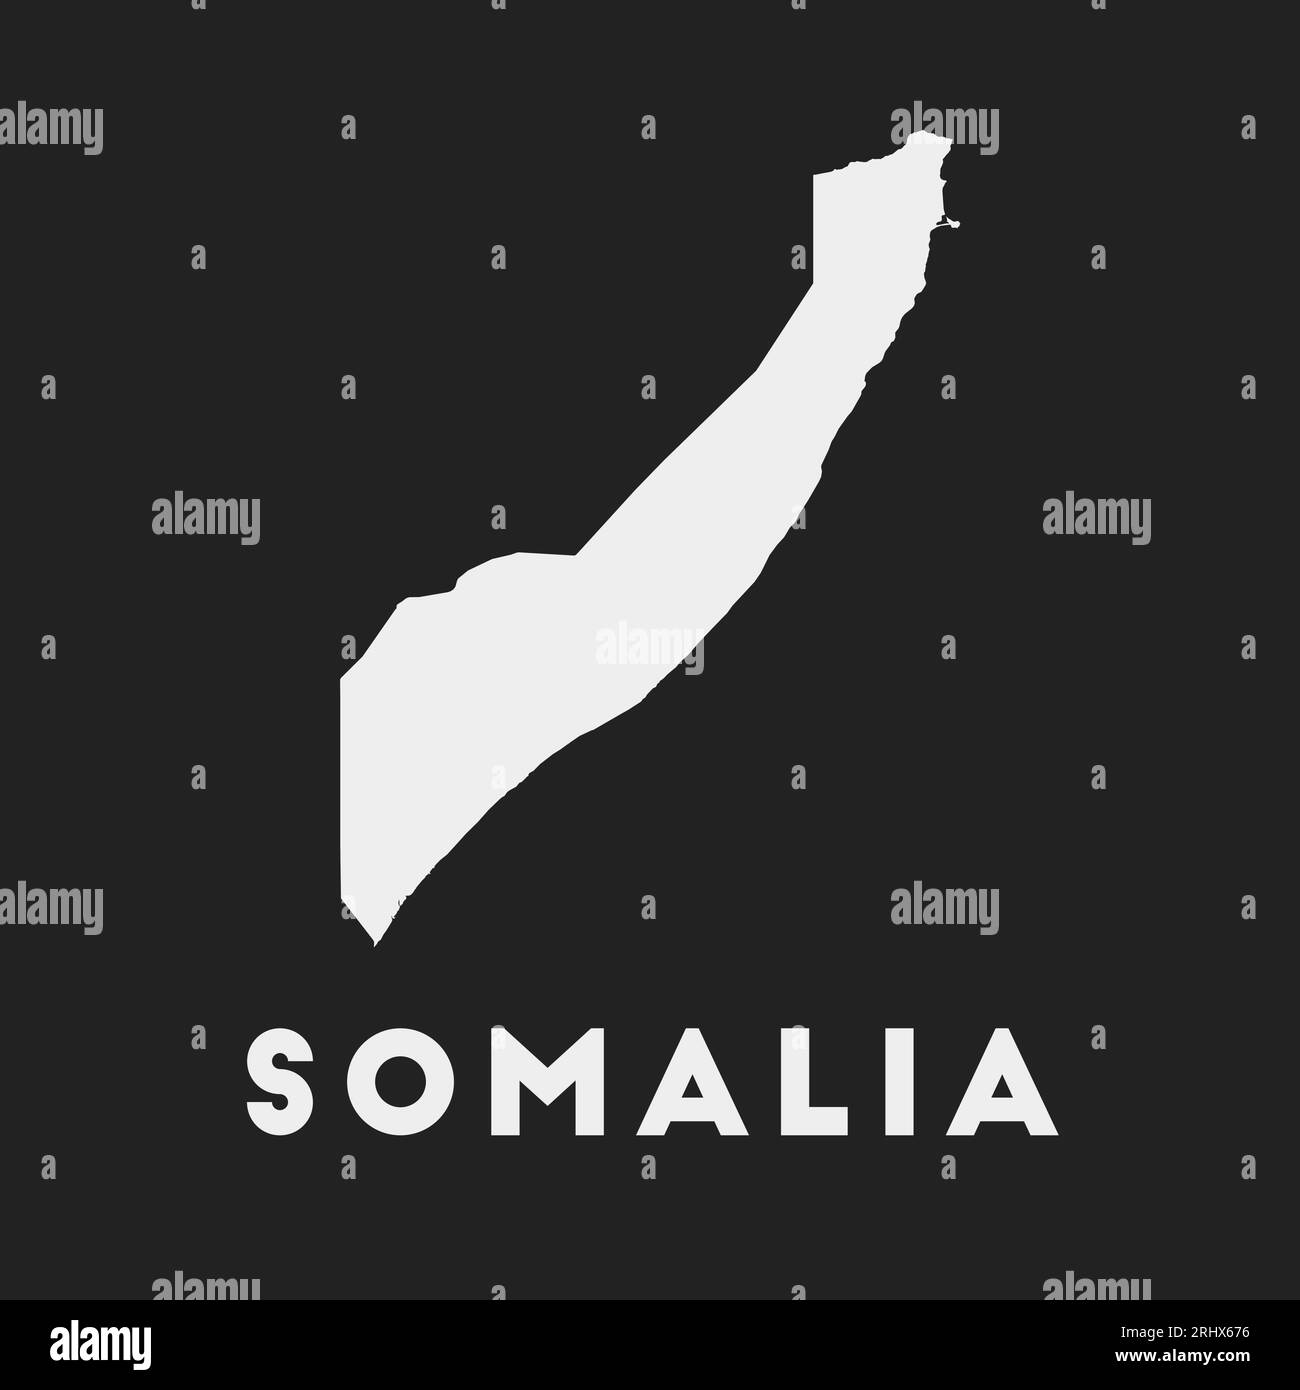 Somalia icon. Country map on dark background. Stylish Somalia map with country name. Vector illustration. Stock Vector